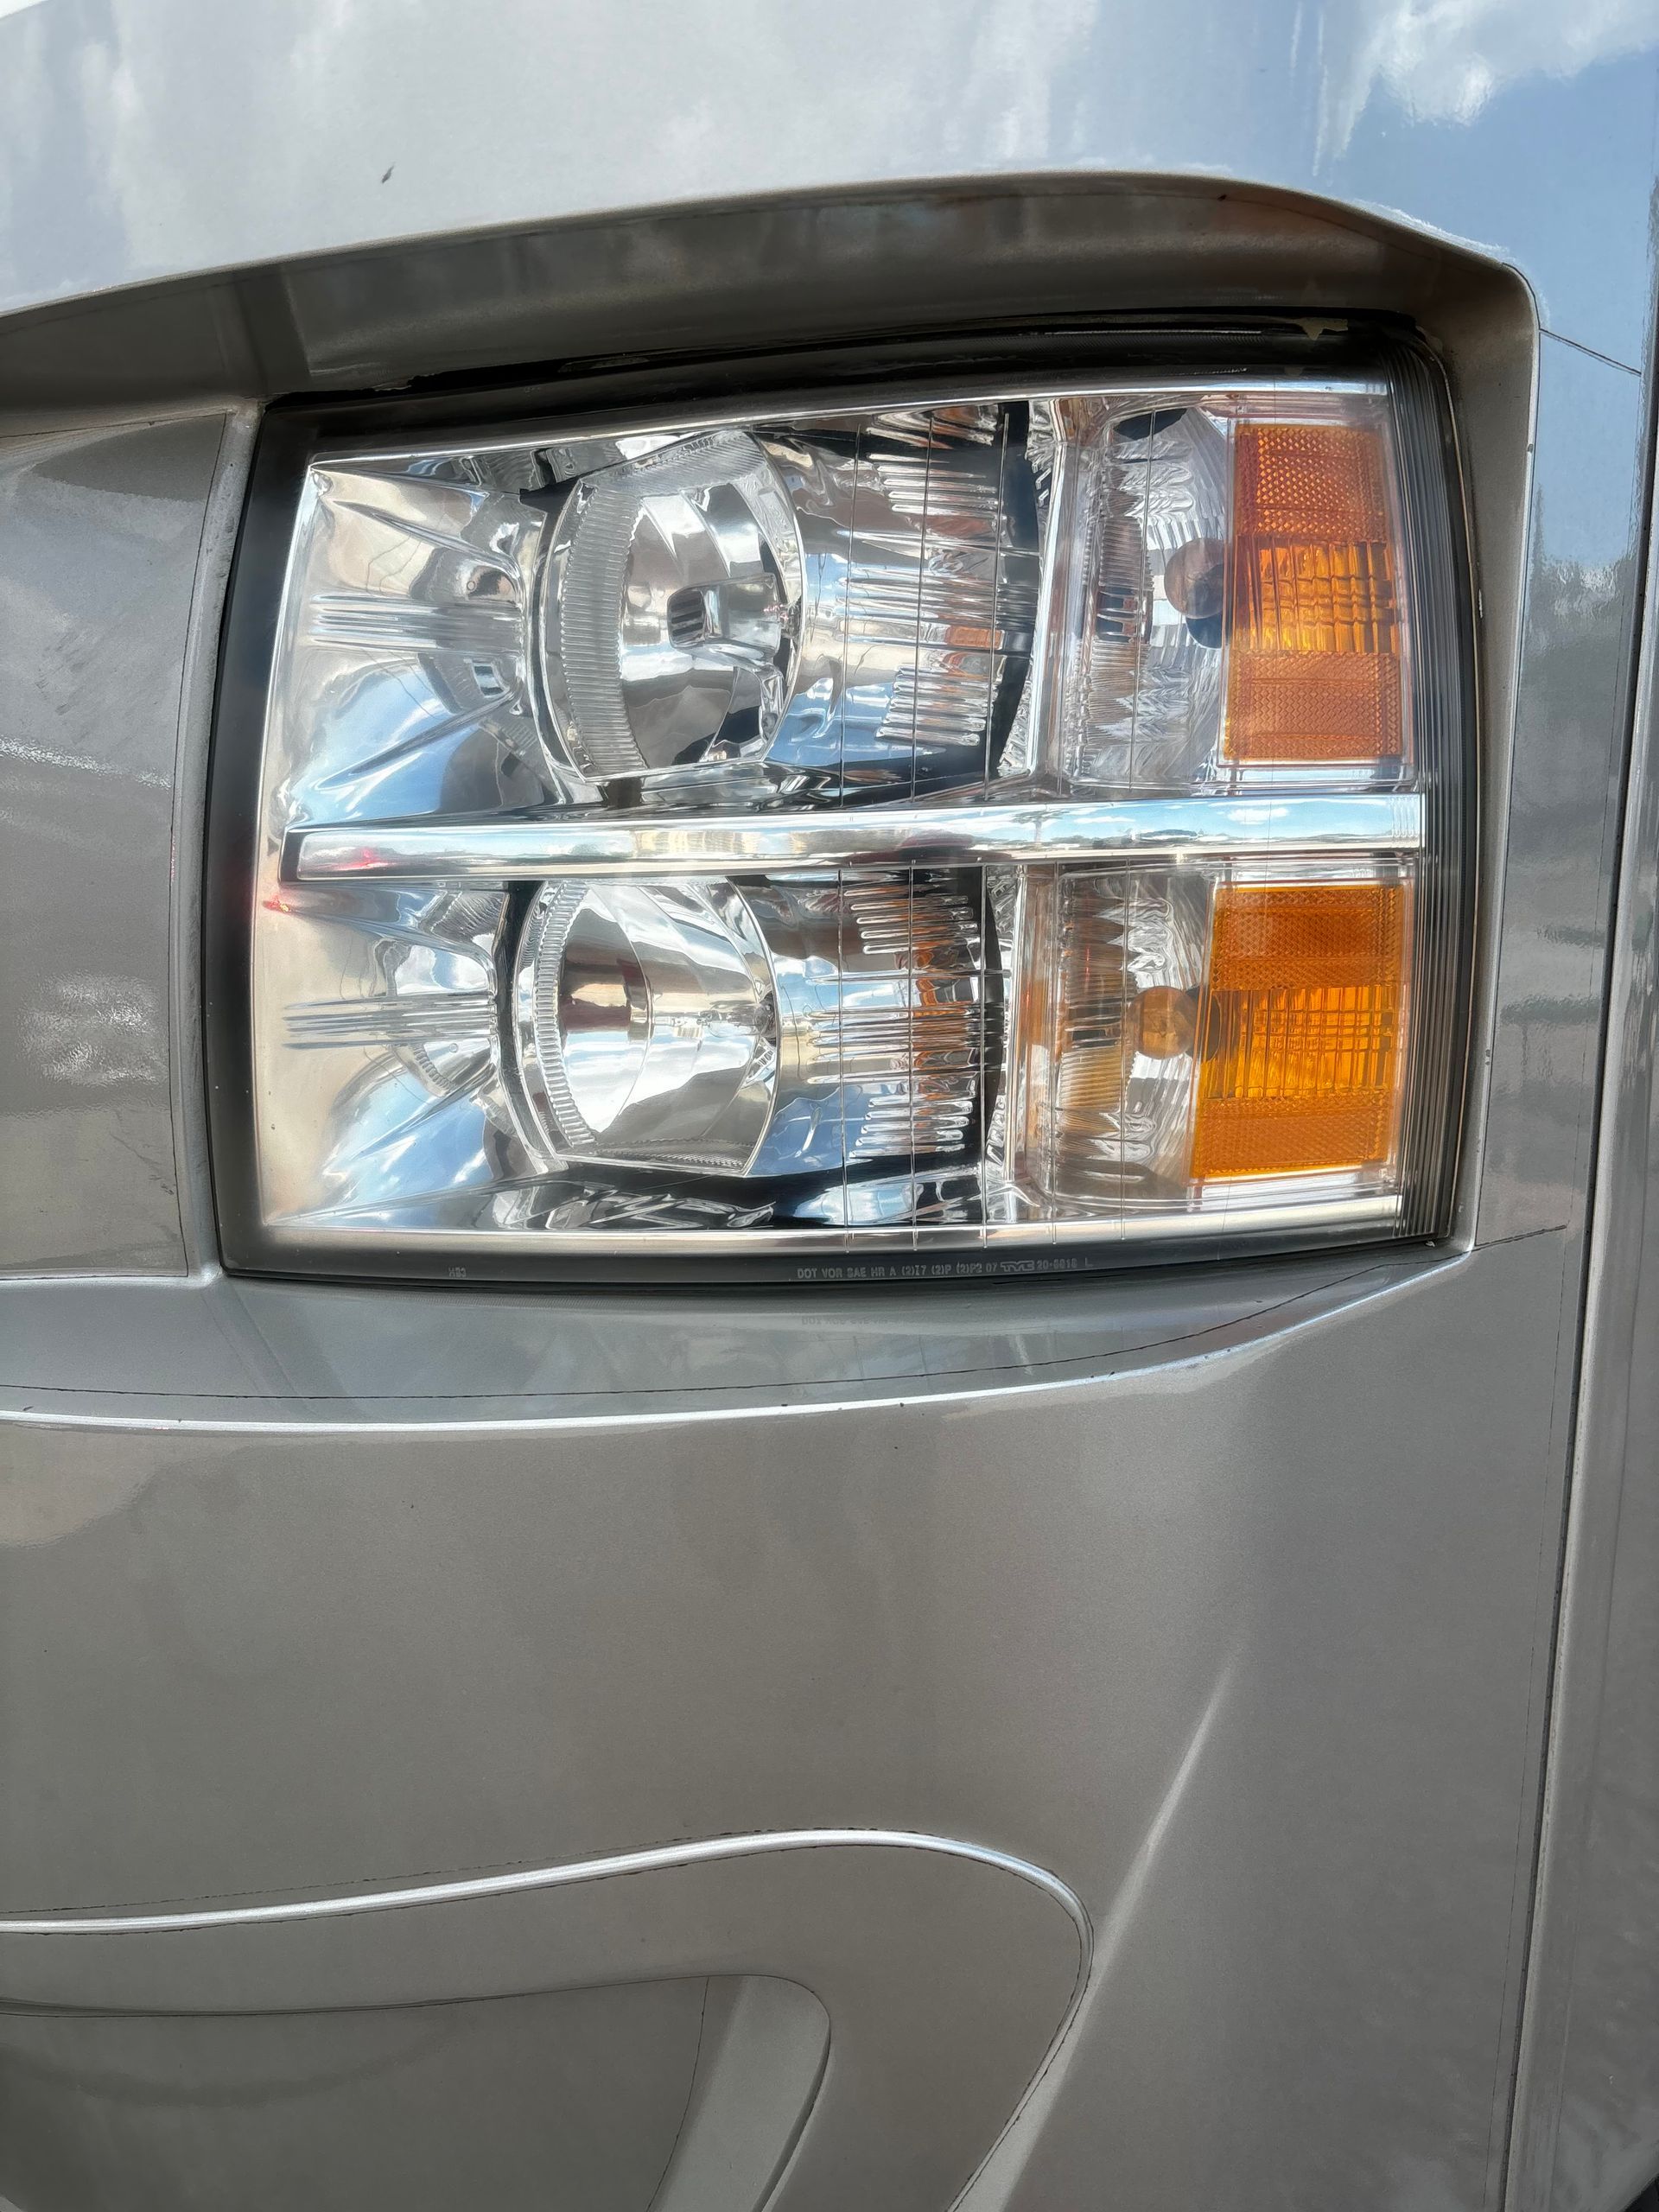 A close up of a car 's headlight on a sunny day.